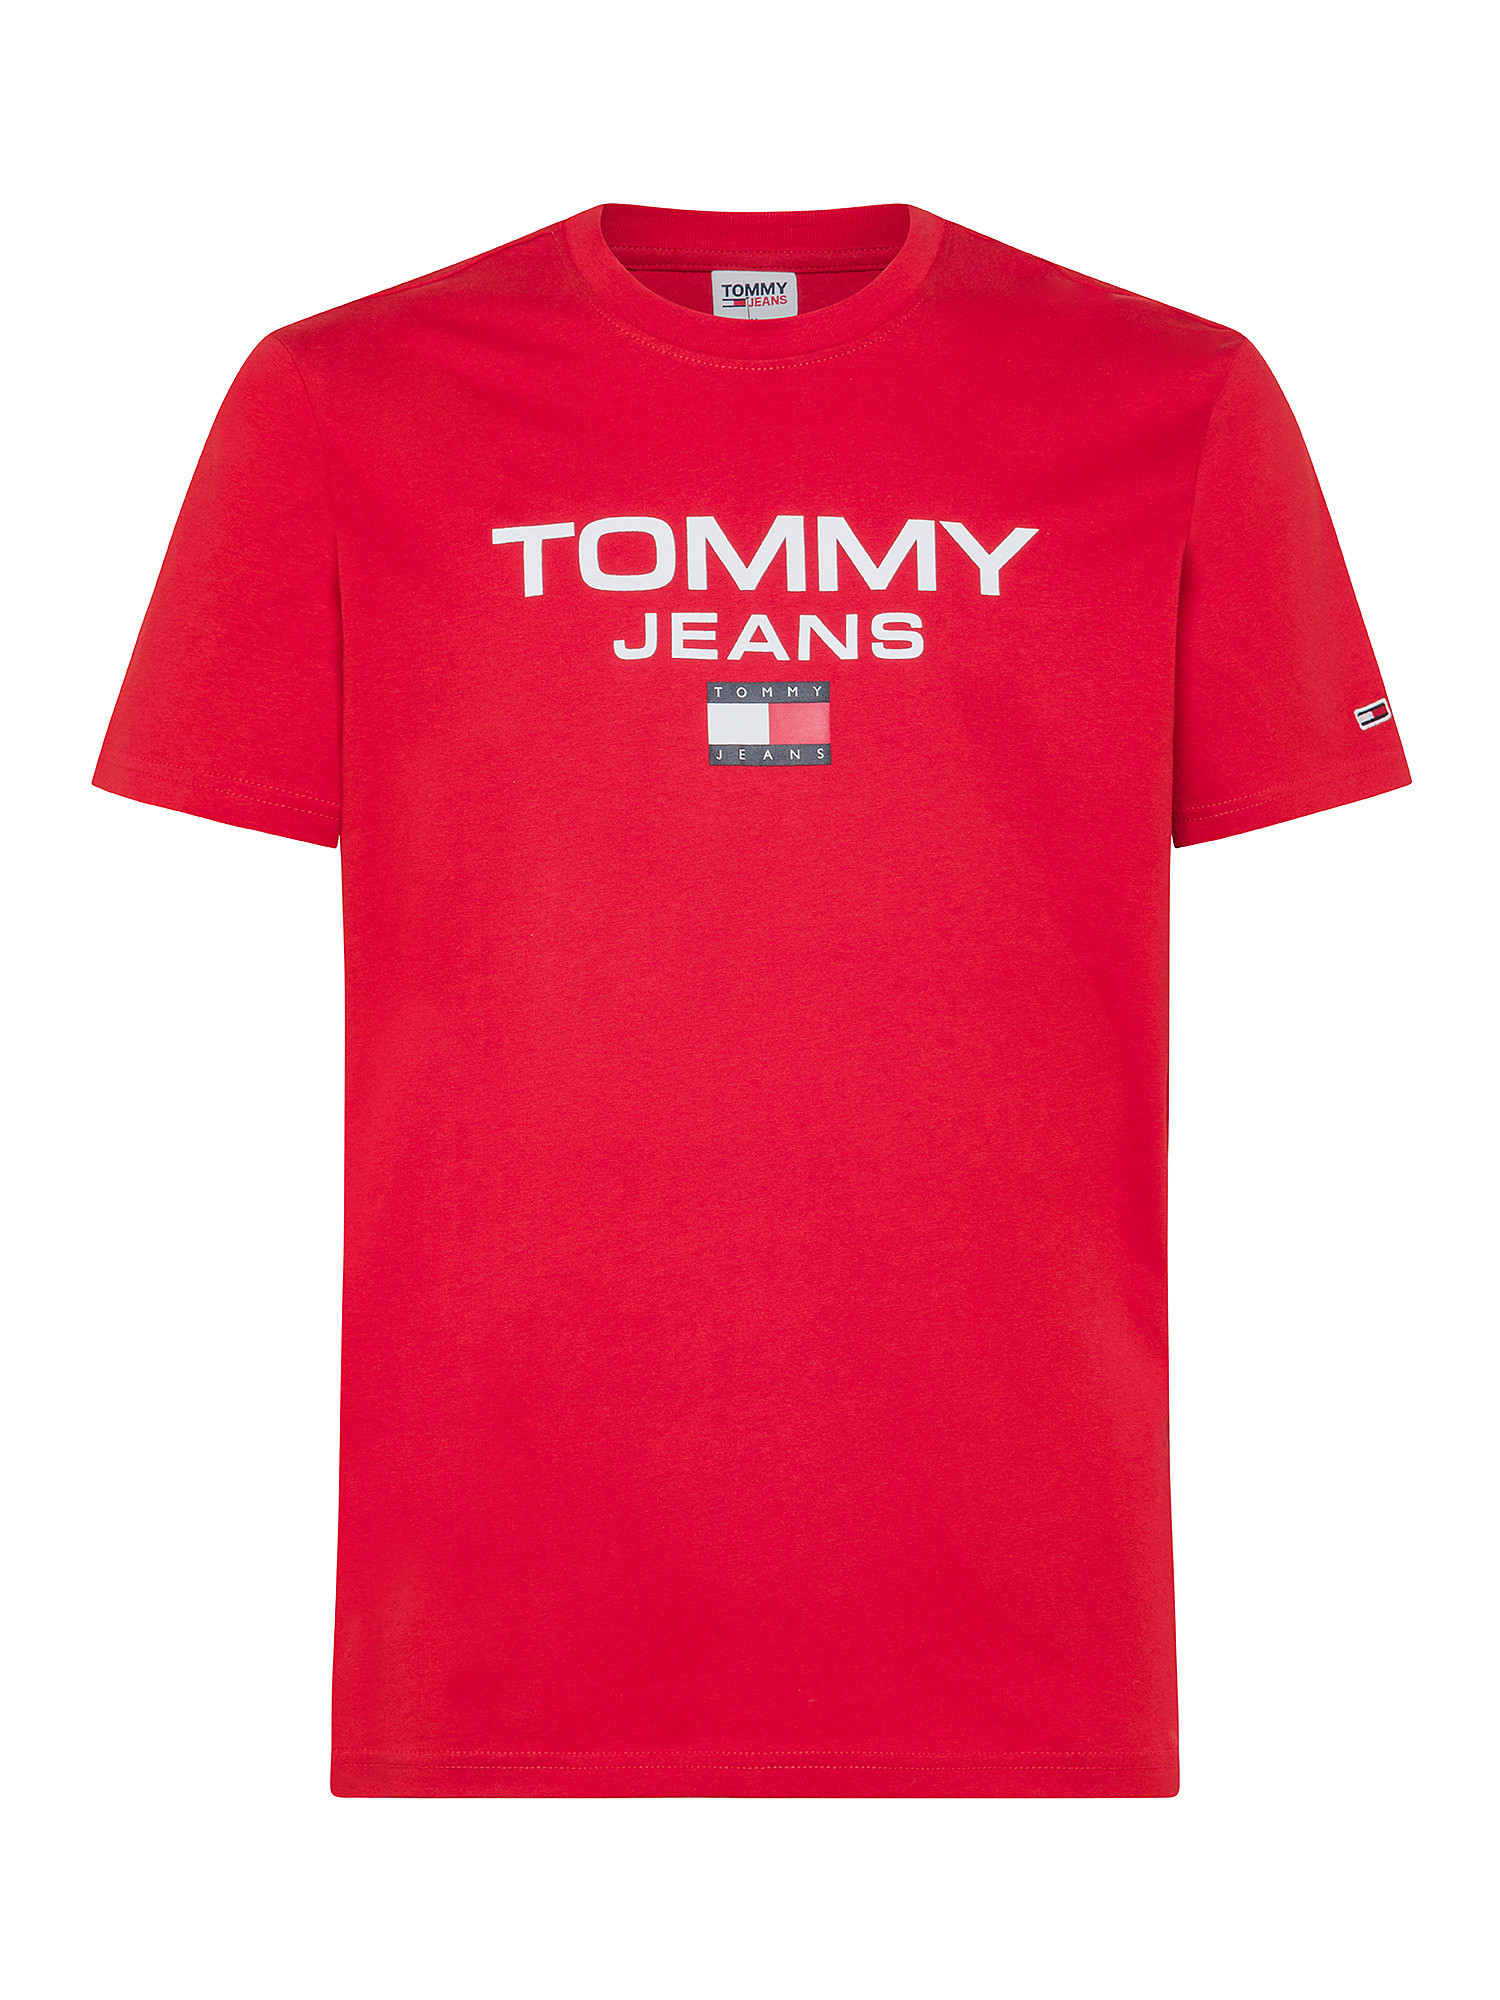 Tommy Jeans - T-shirt girocollo in cotone con stampa e logo, Rosso, large image number 0